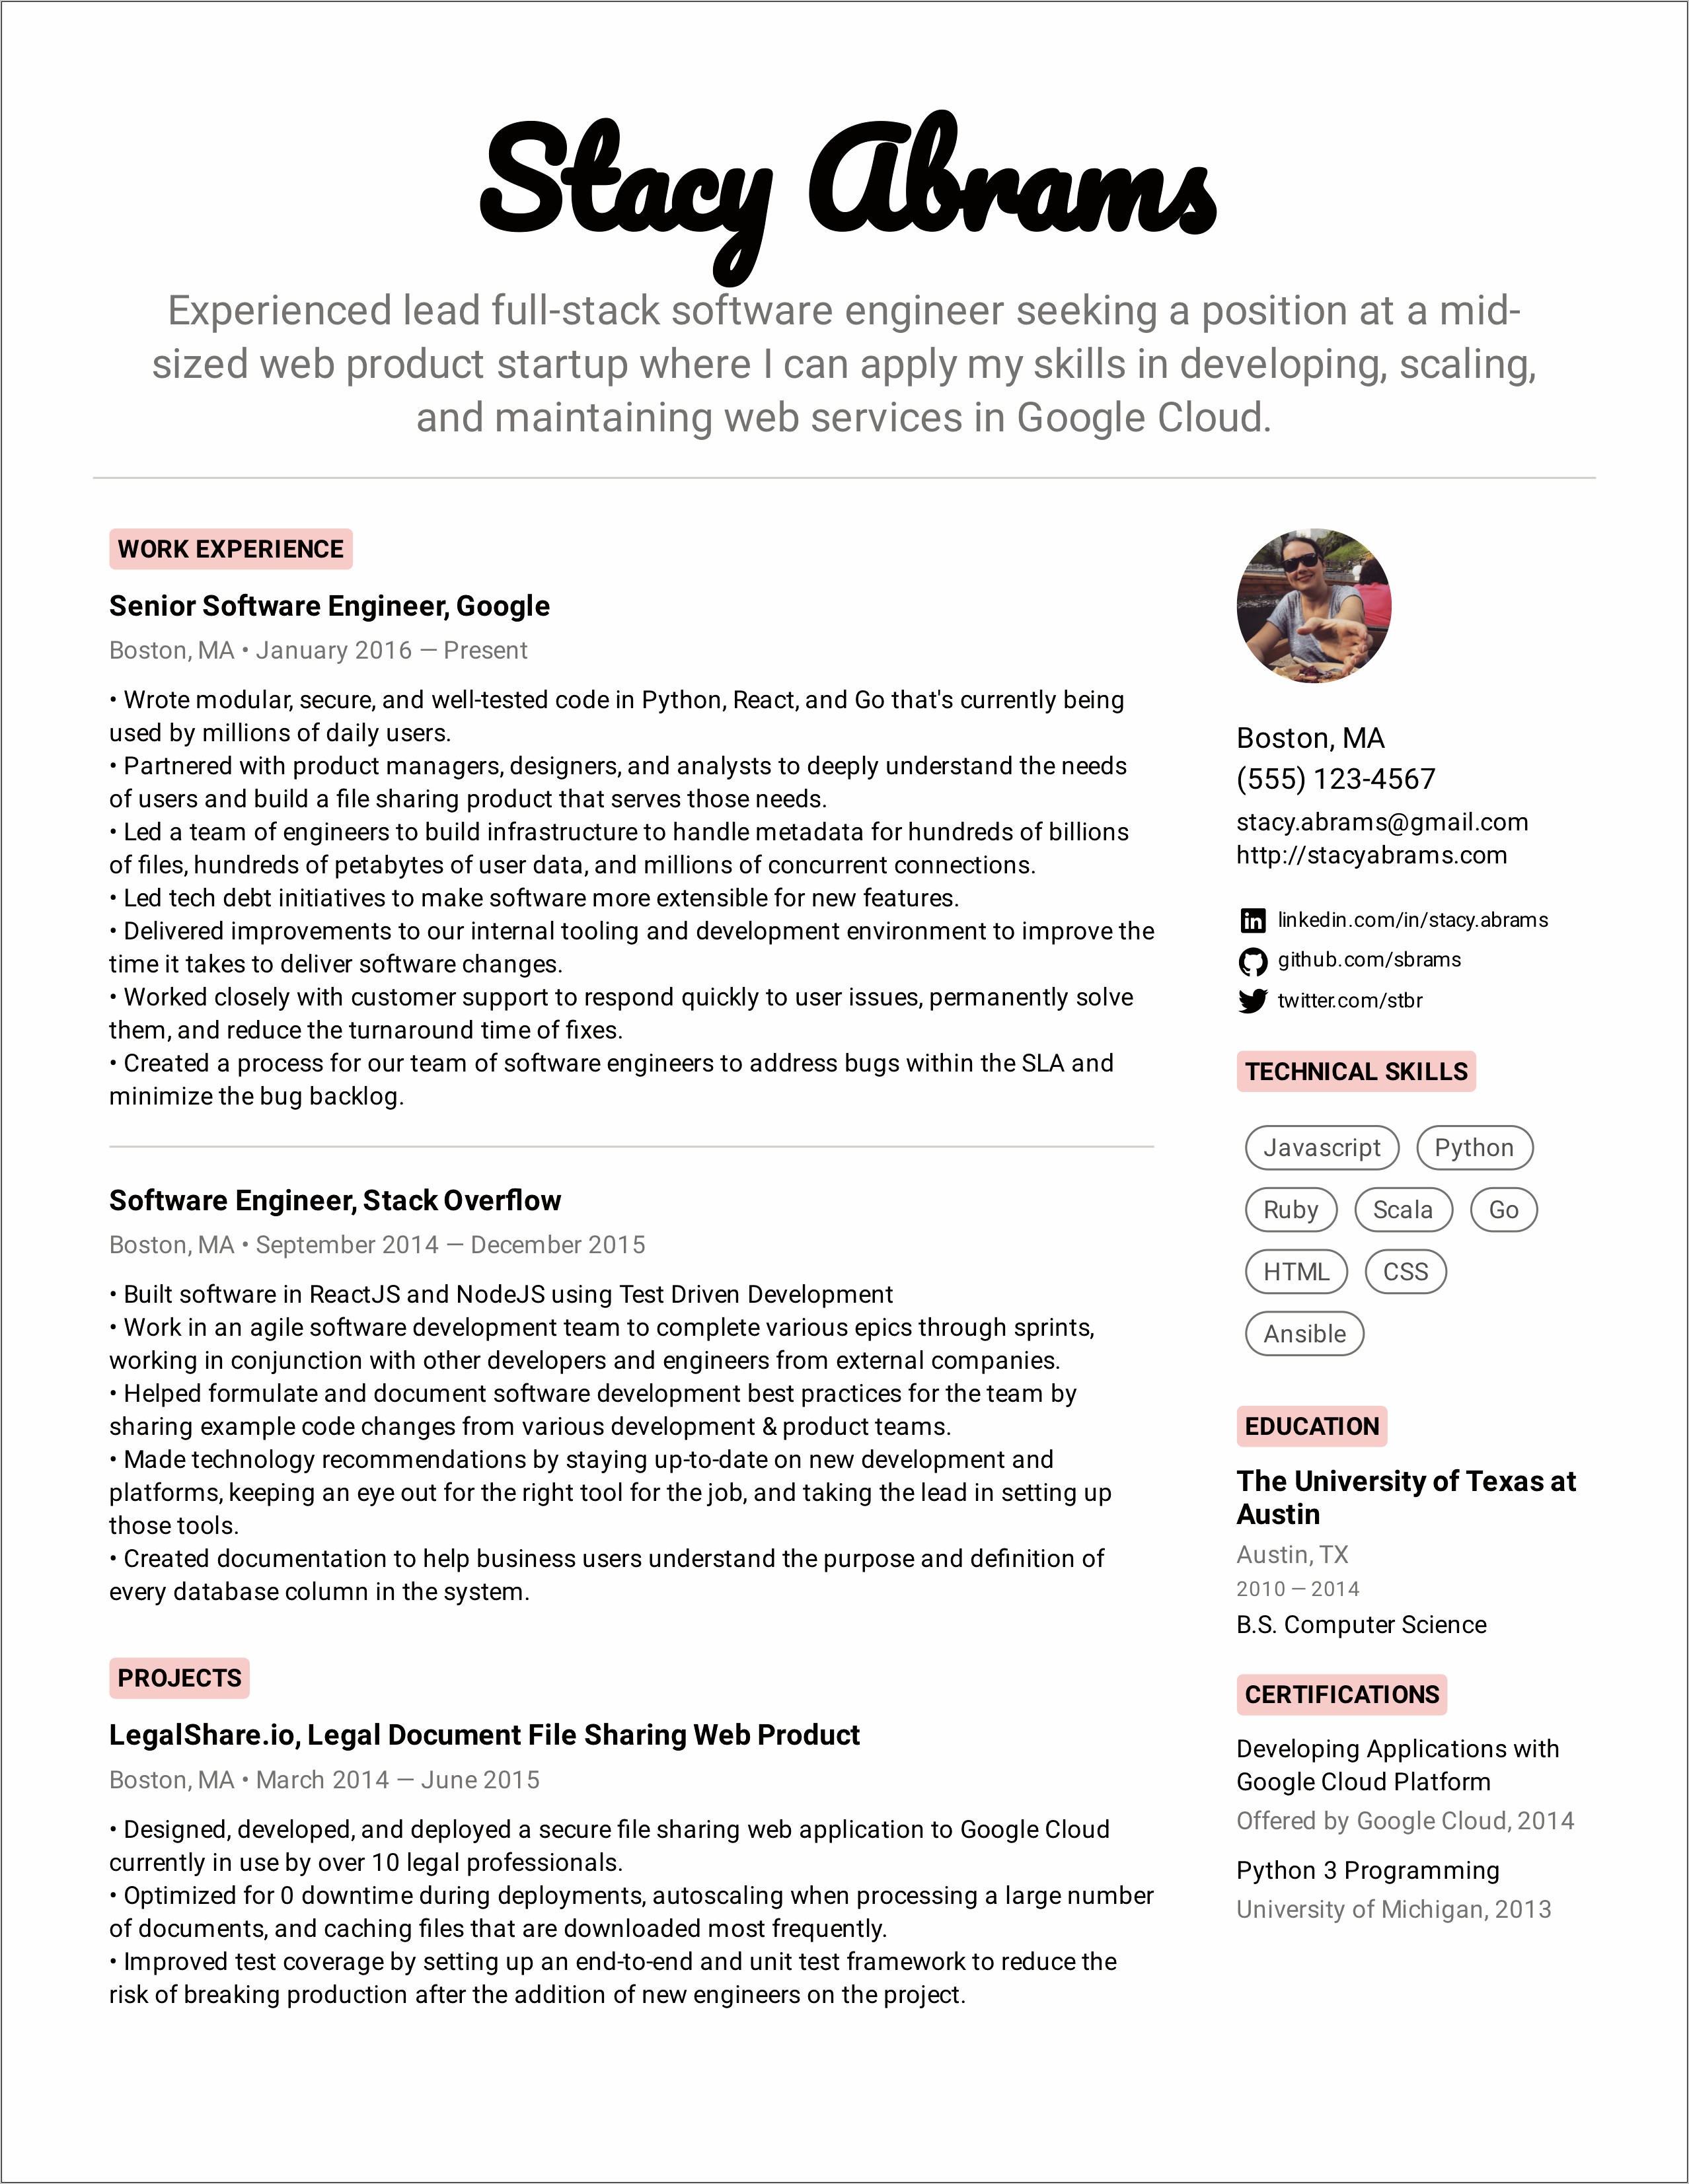 Does Using A Resume Template Look Bad